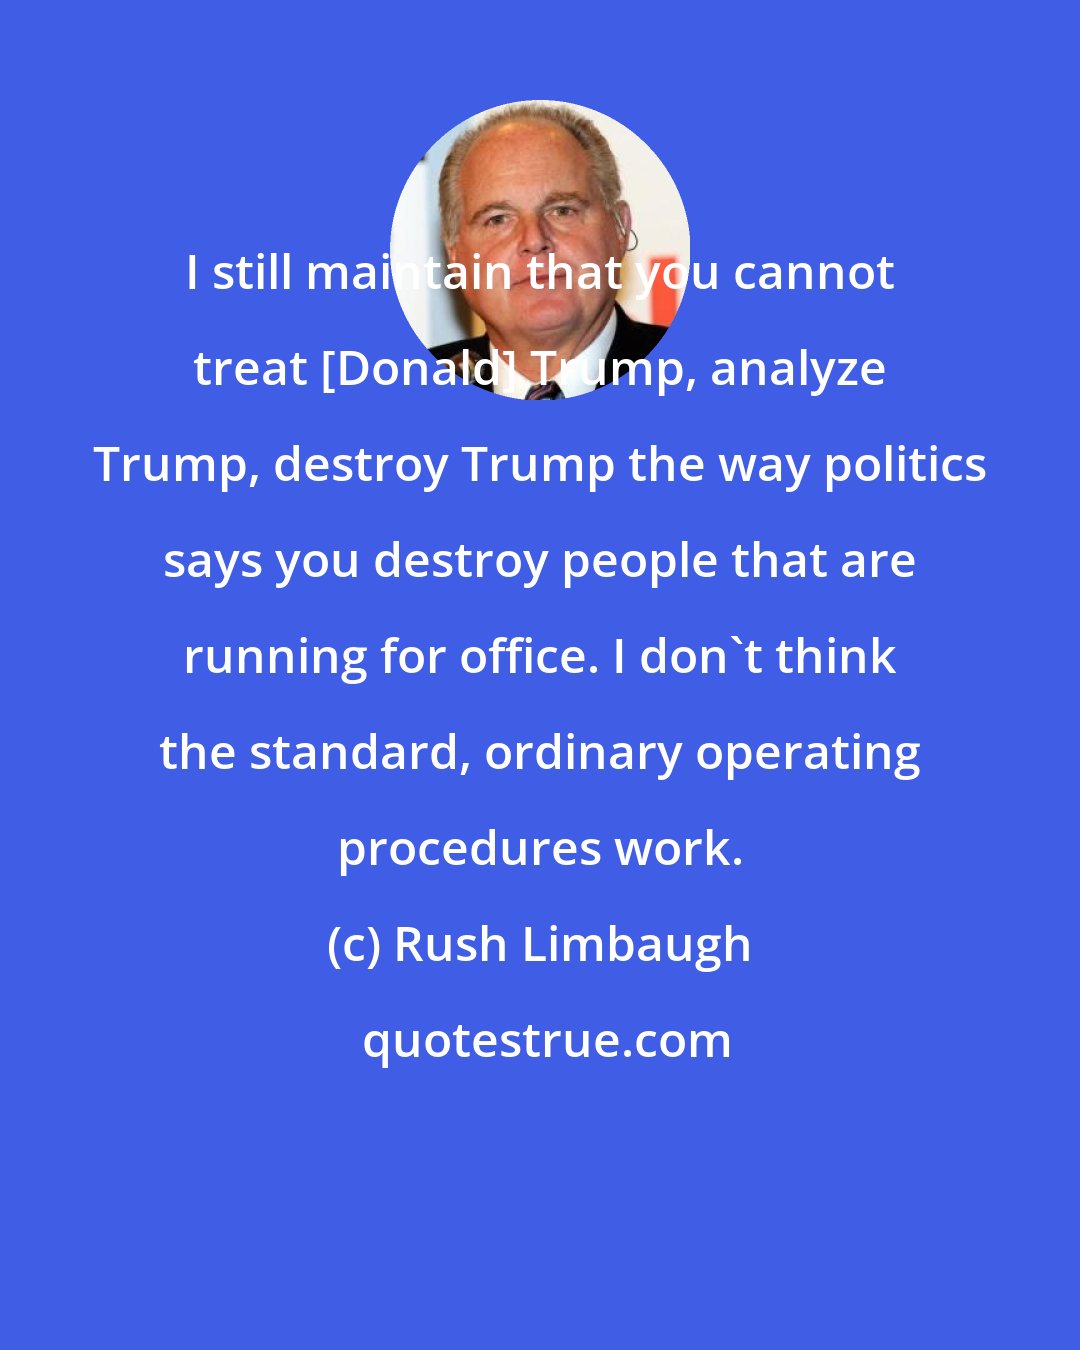 Rush Limbaugh: I still maintain that you cannot treat [Donald] Trump, analyze Trump, destroy Trump the way politics says you destroy people that are running for office. I don't think the standard, ordinary operating procedures work.